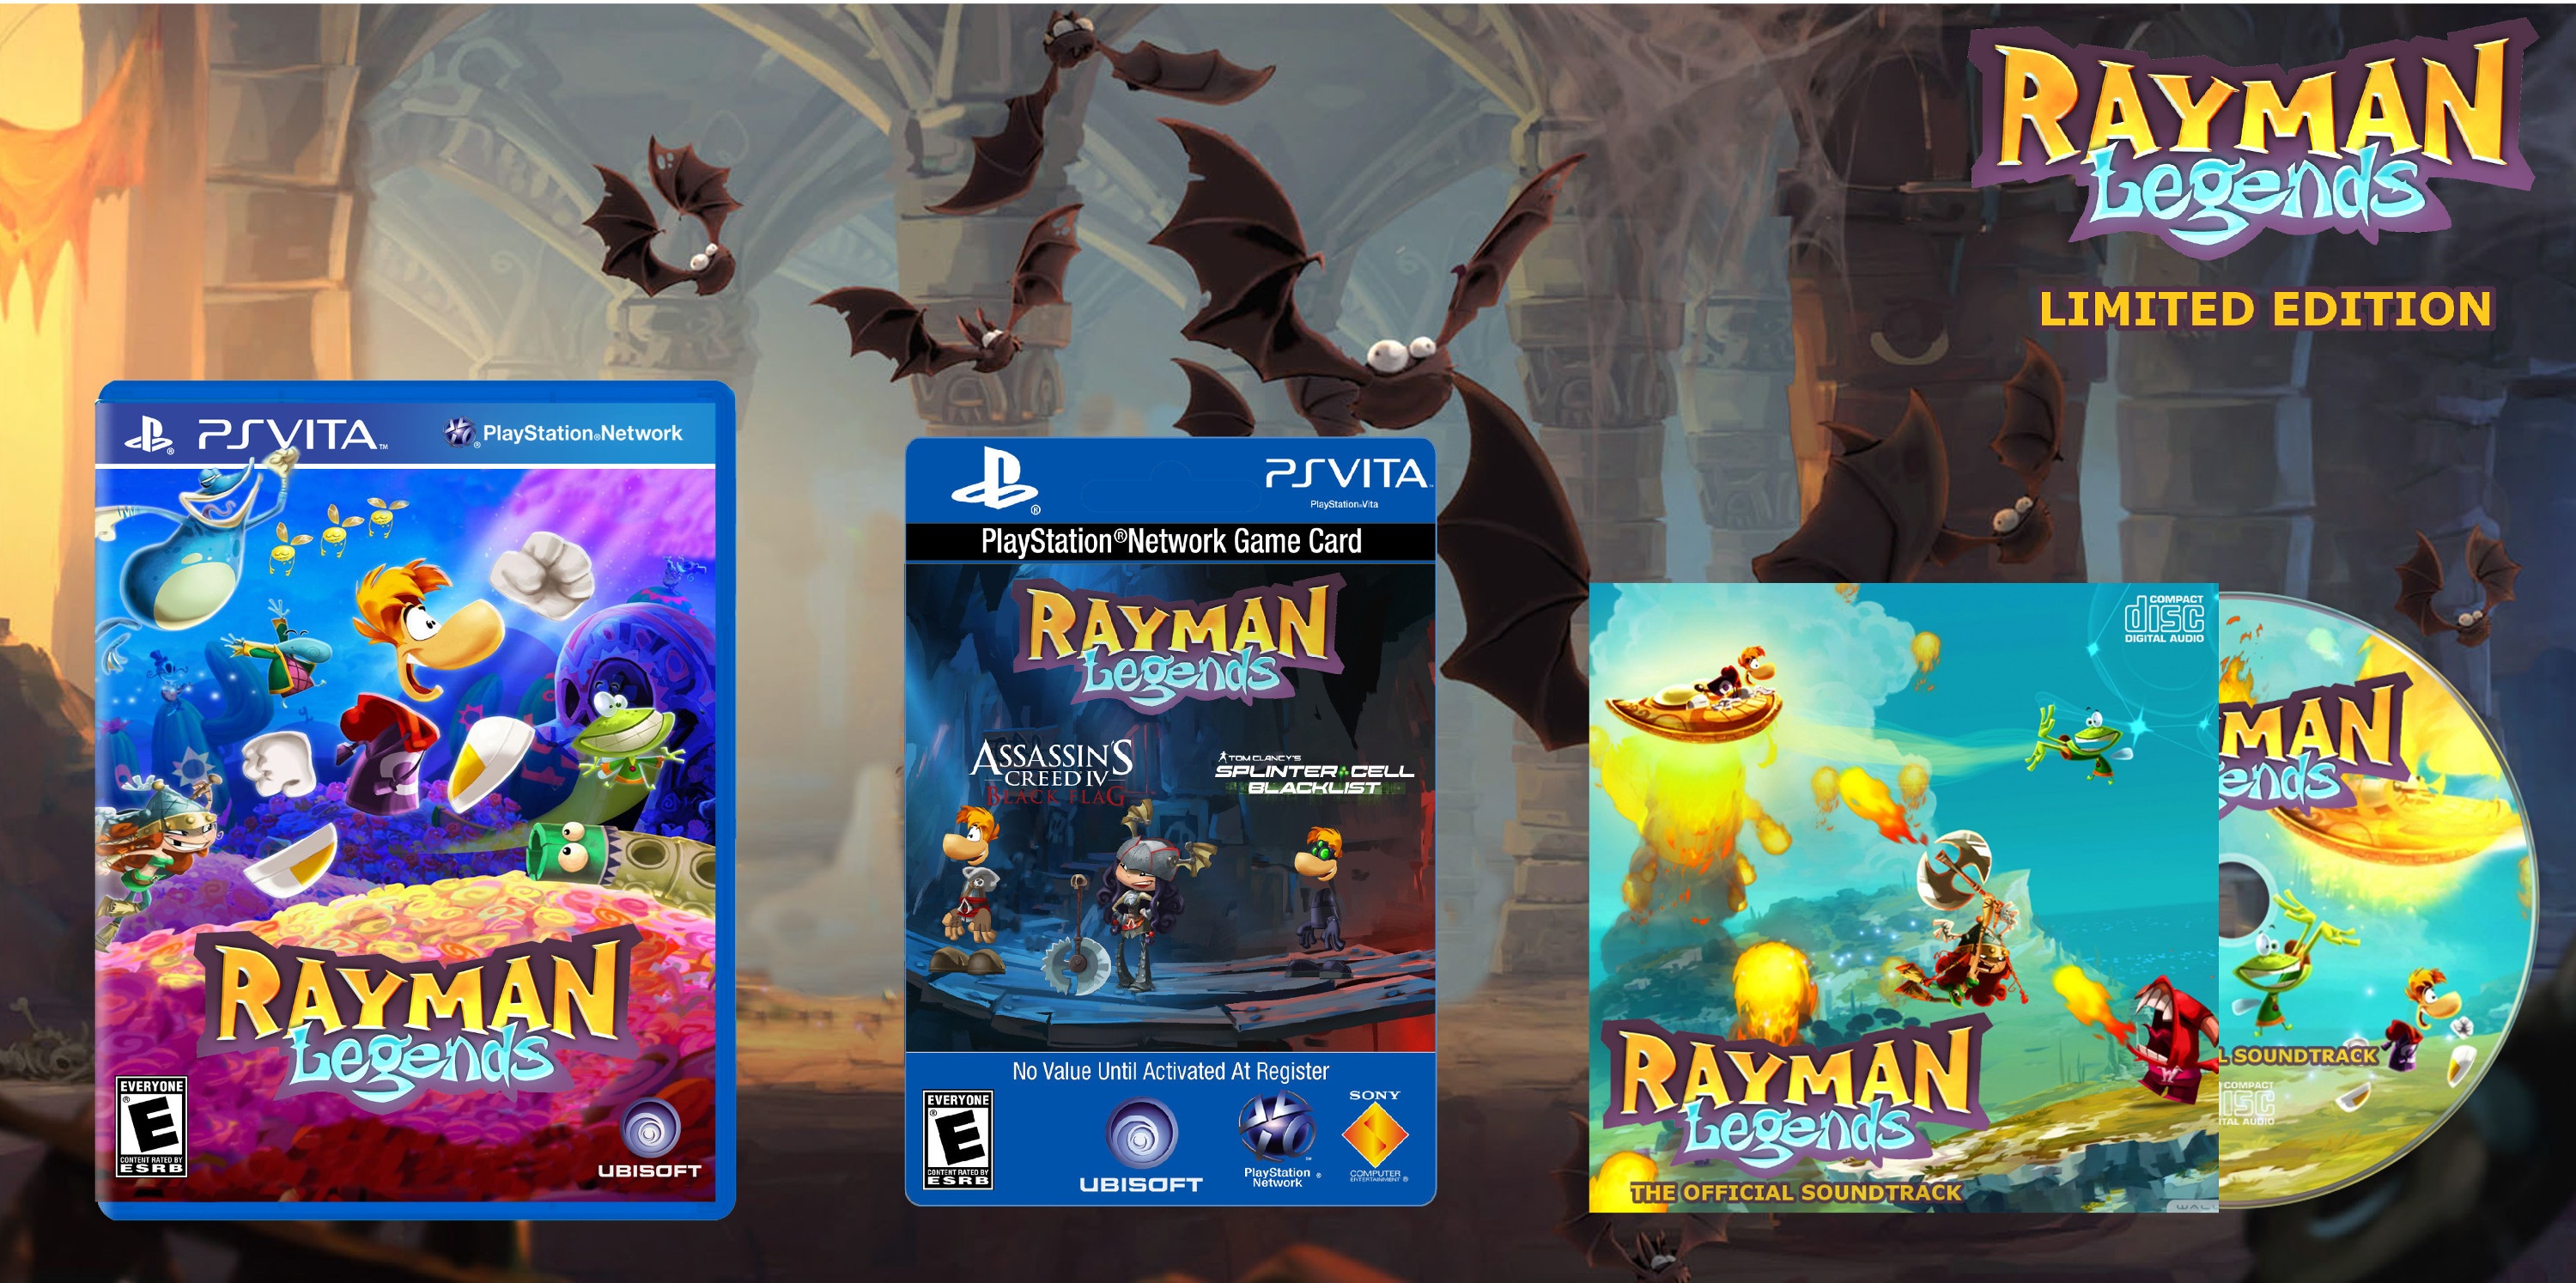 Rayman Legends Limited Edition box cover